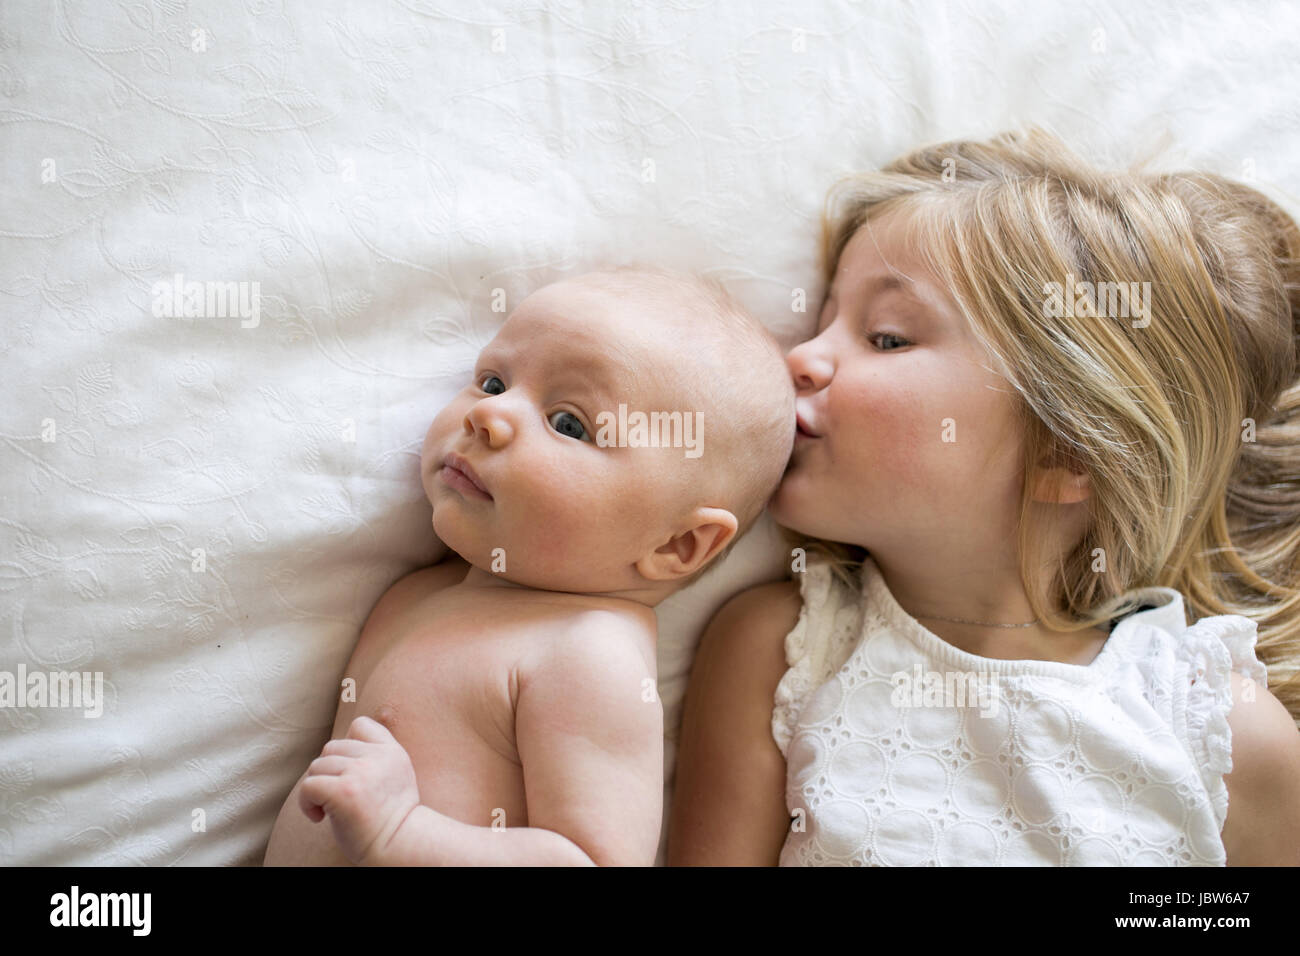 Overhead view of young girl and baby brother lying on bed, girl kissing baby brother Stock Photo